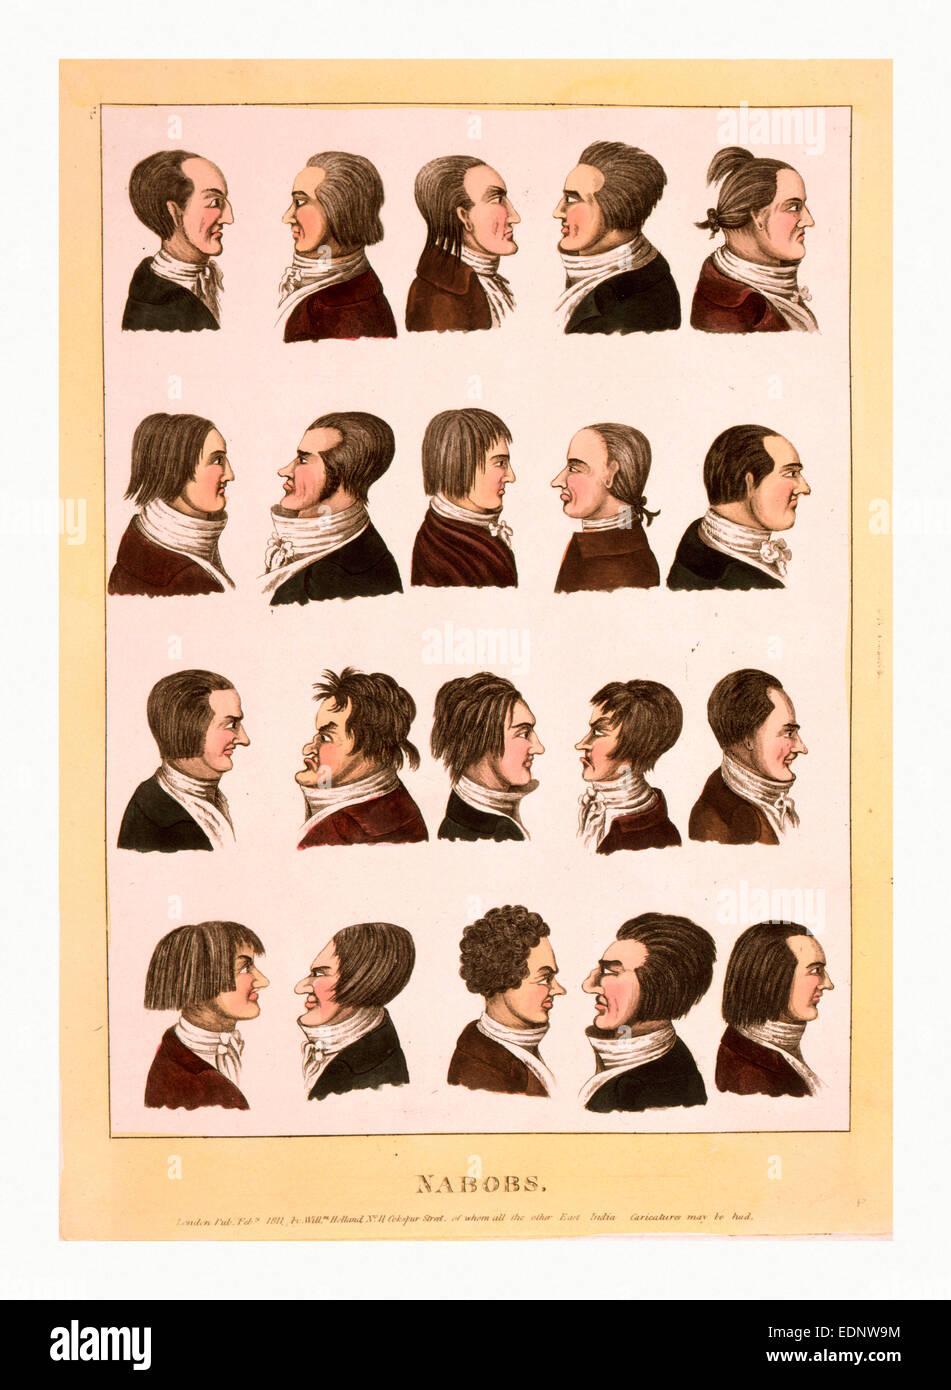 Engraving 1811, profile portraits of 20 men, called nabobs, who are representatives of the East India Company Stock Photo